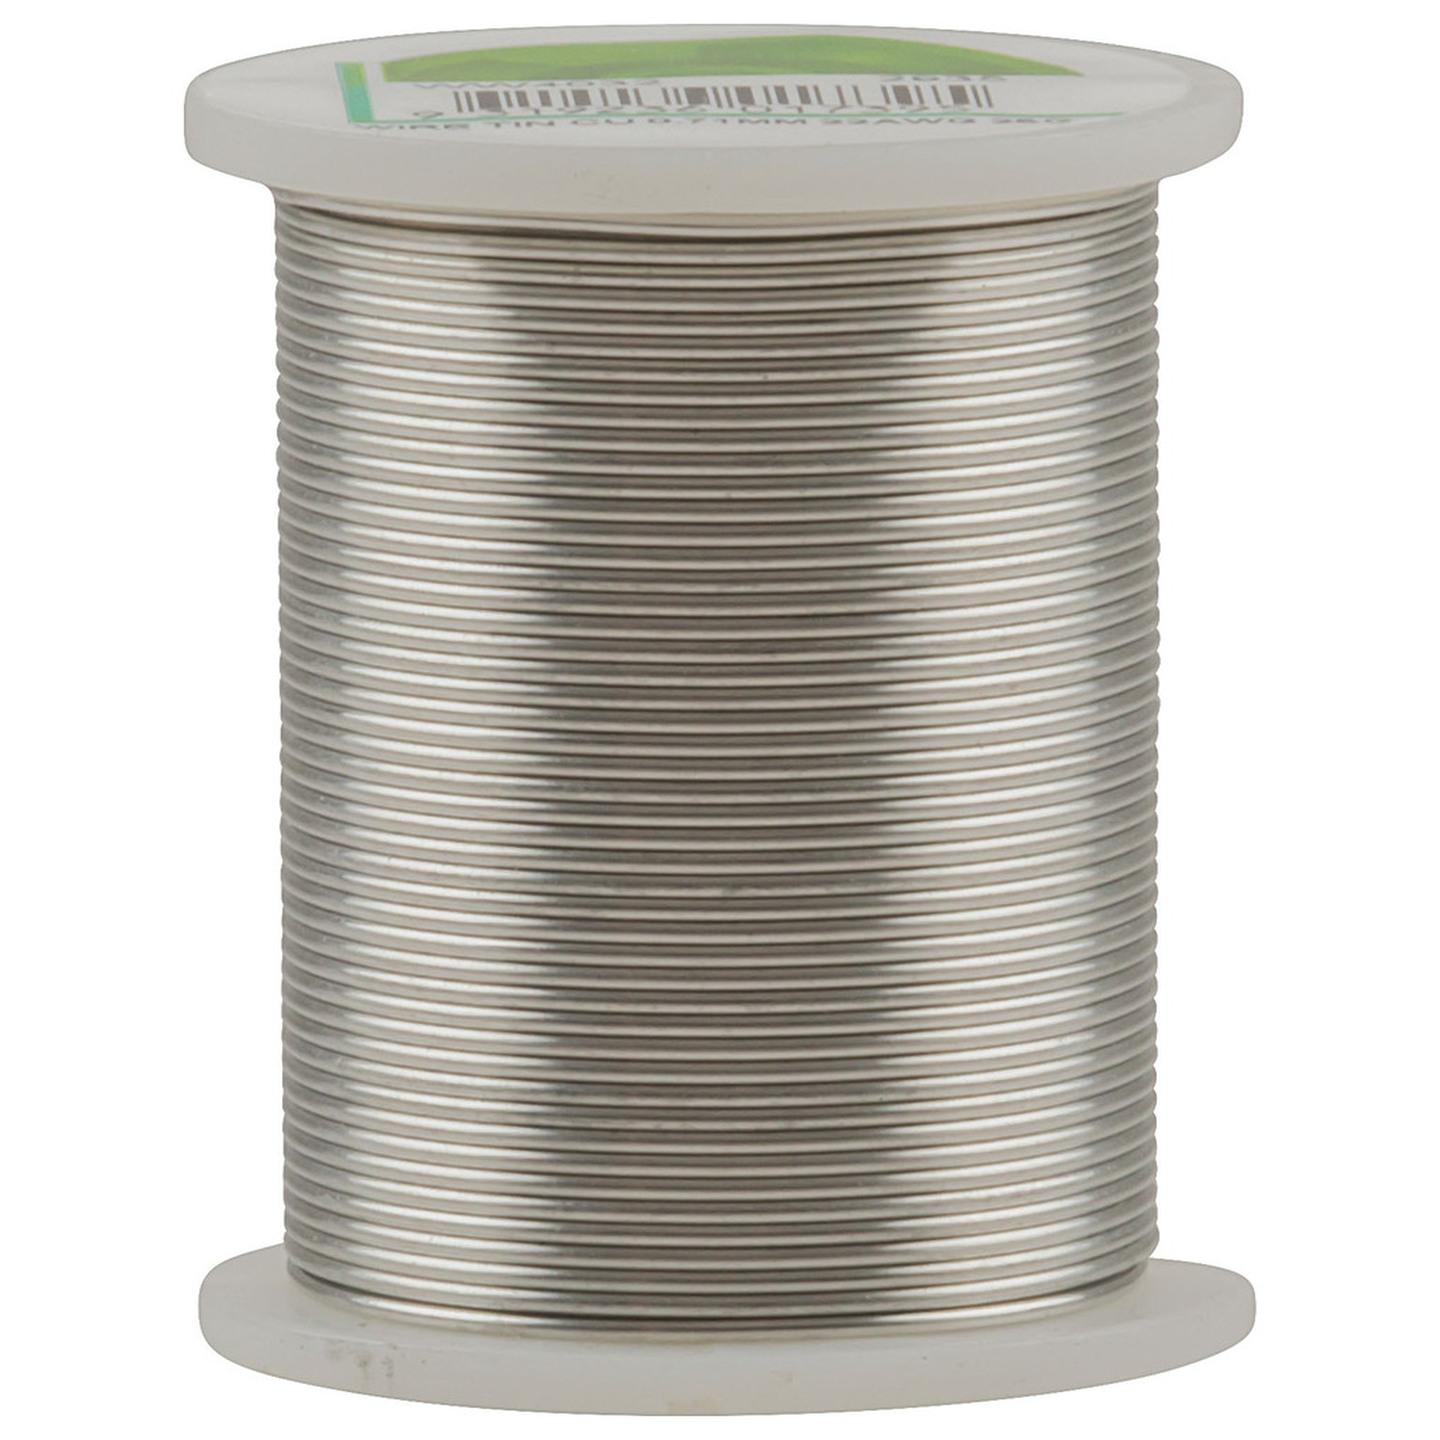 Tinned Copper Wire - 25 gram Pack